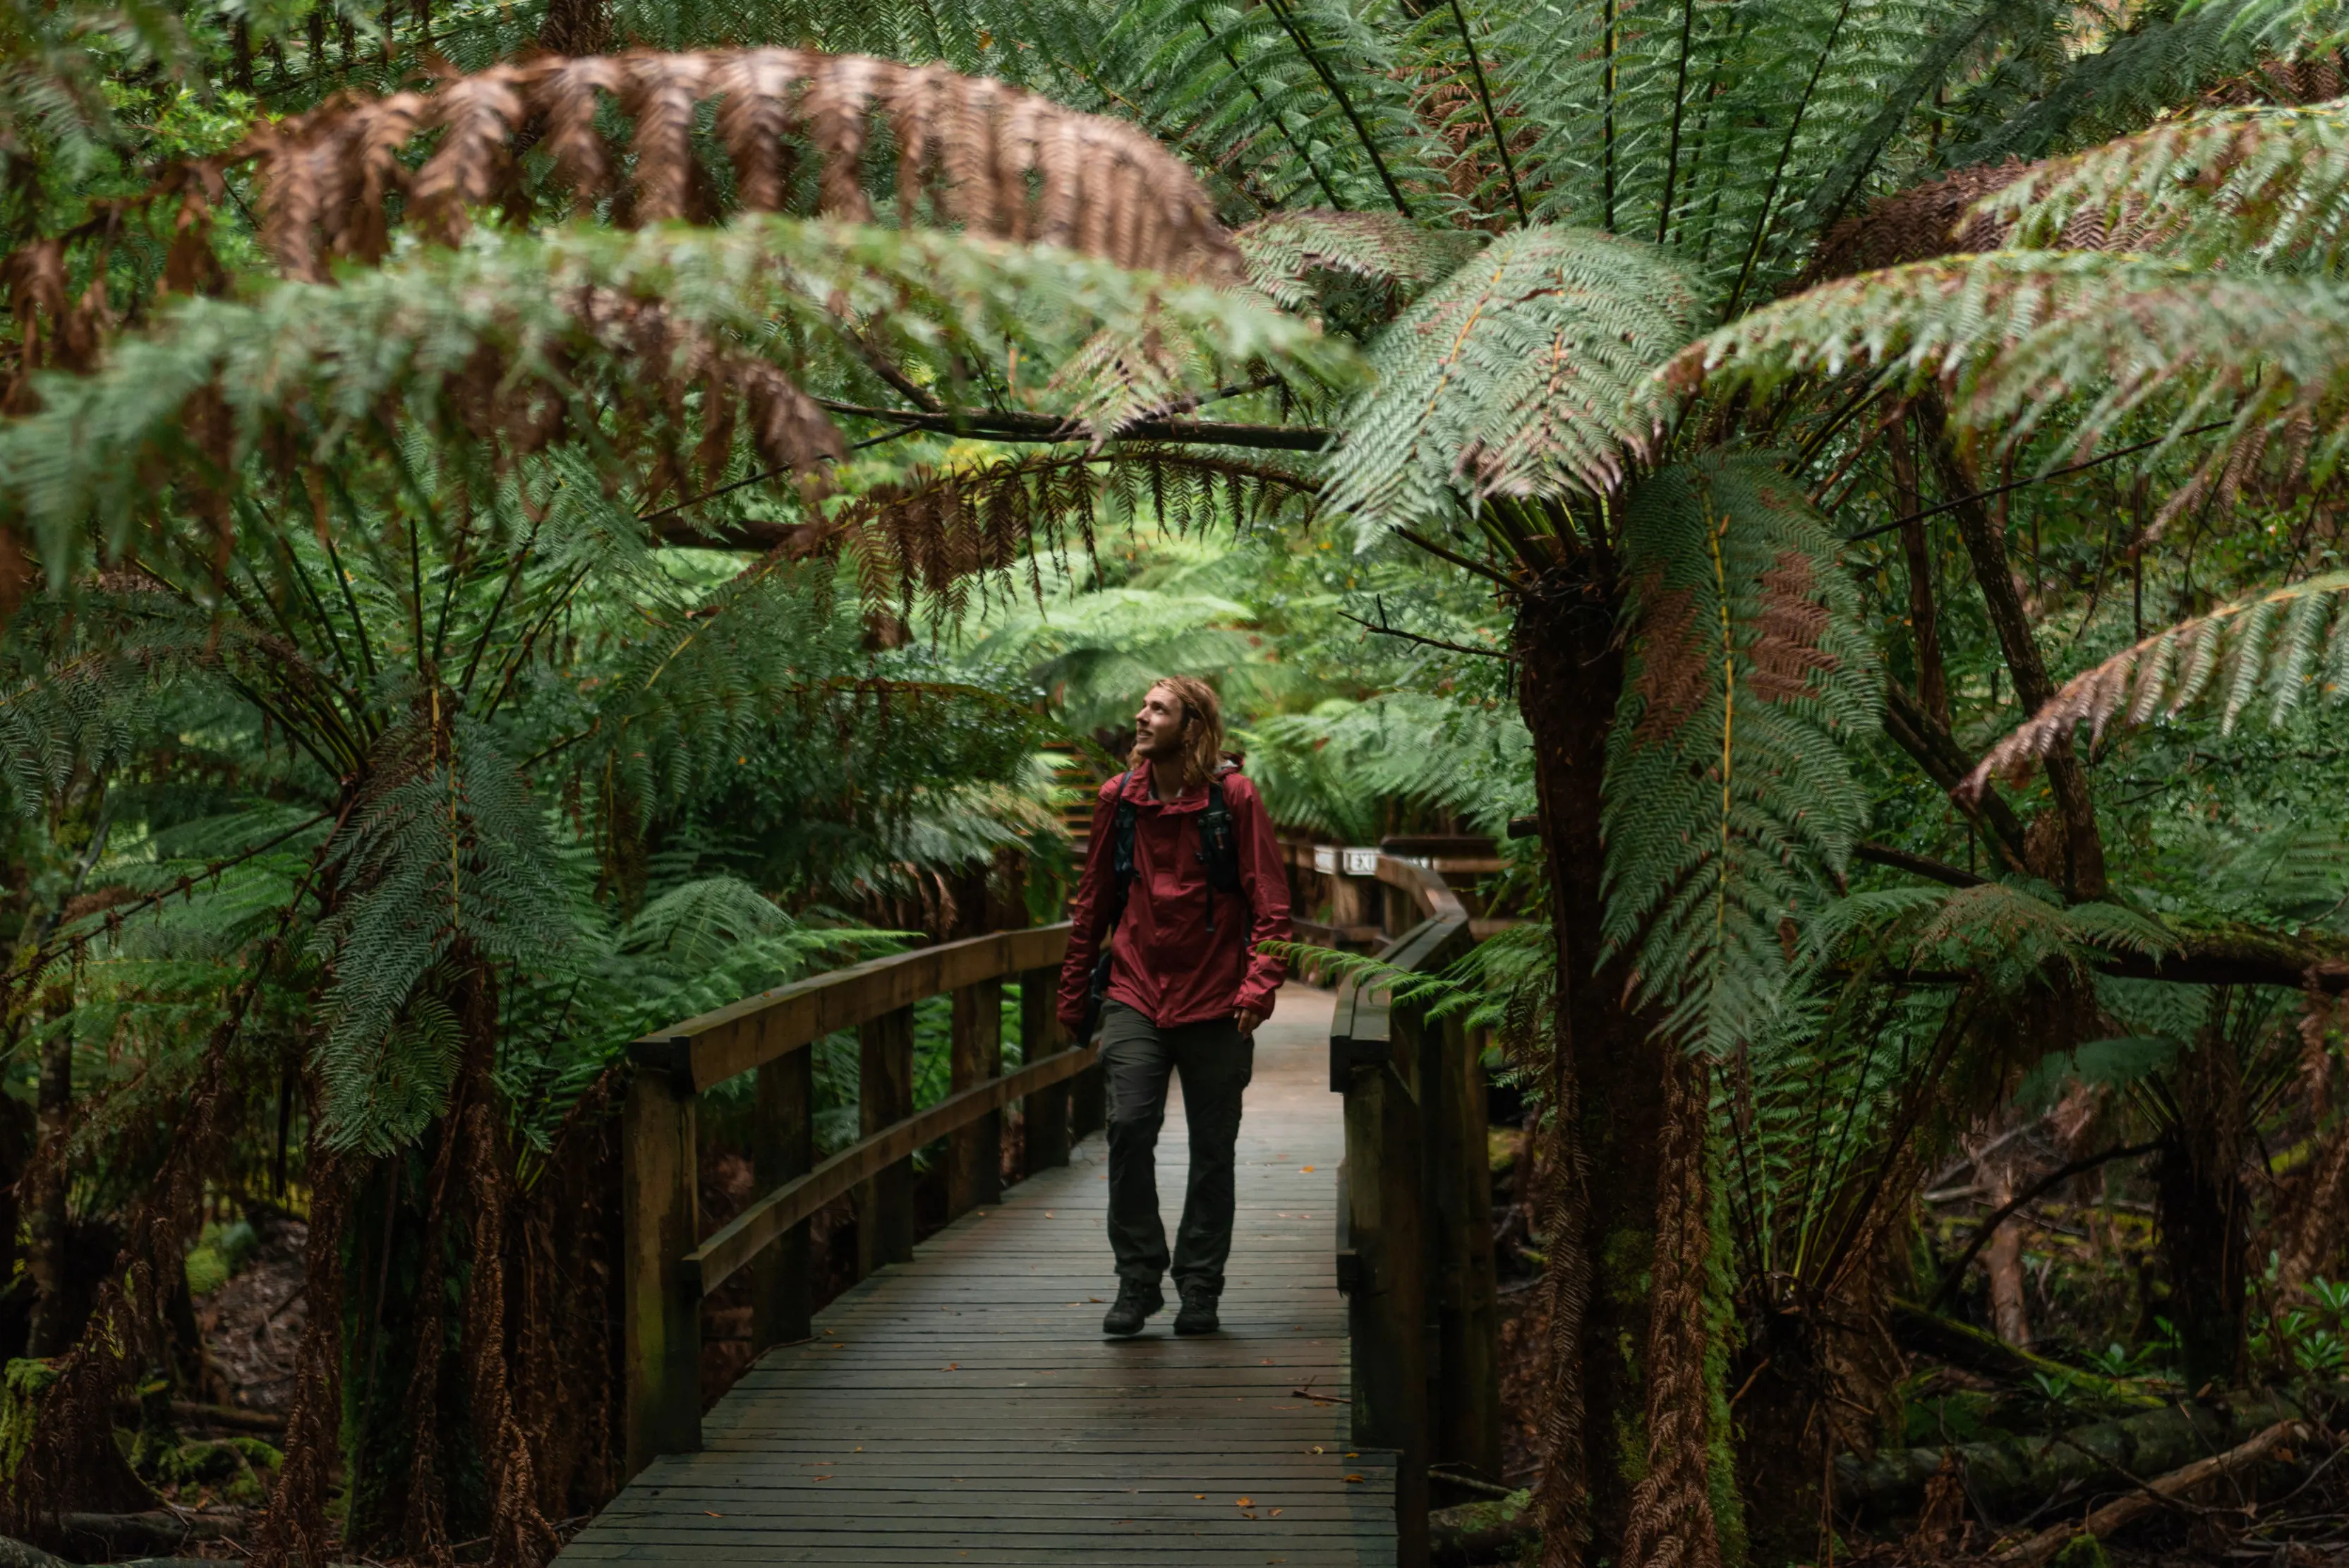 A person walks across an elevated wooden boardwalk through a forest of tall ferns at Hastings Caves State Reserve.